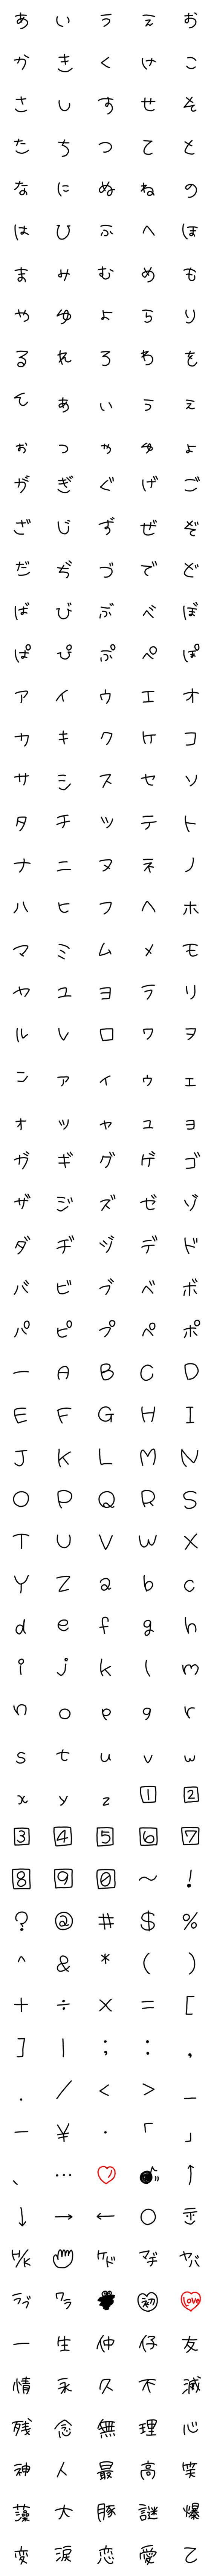 [LINE絵文字]2008年くらいのプリ帳の文字の画像一覧